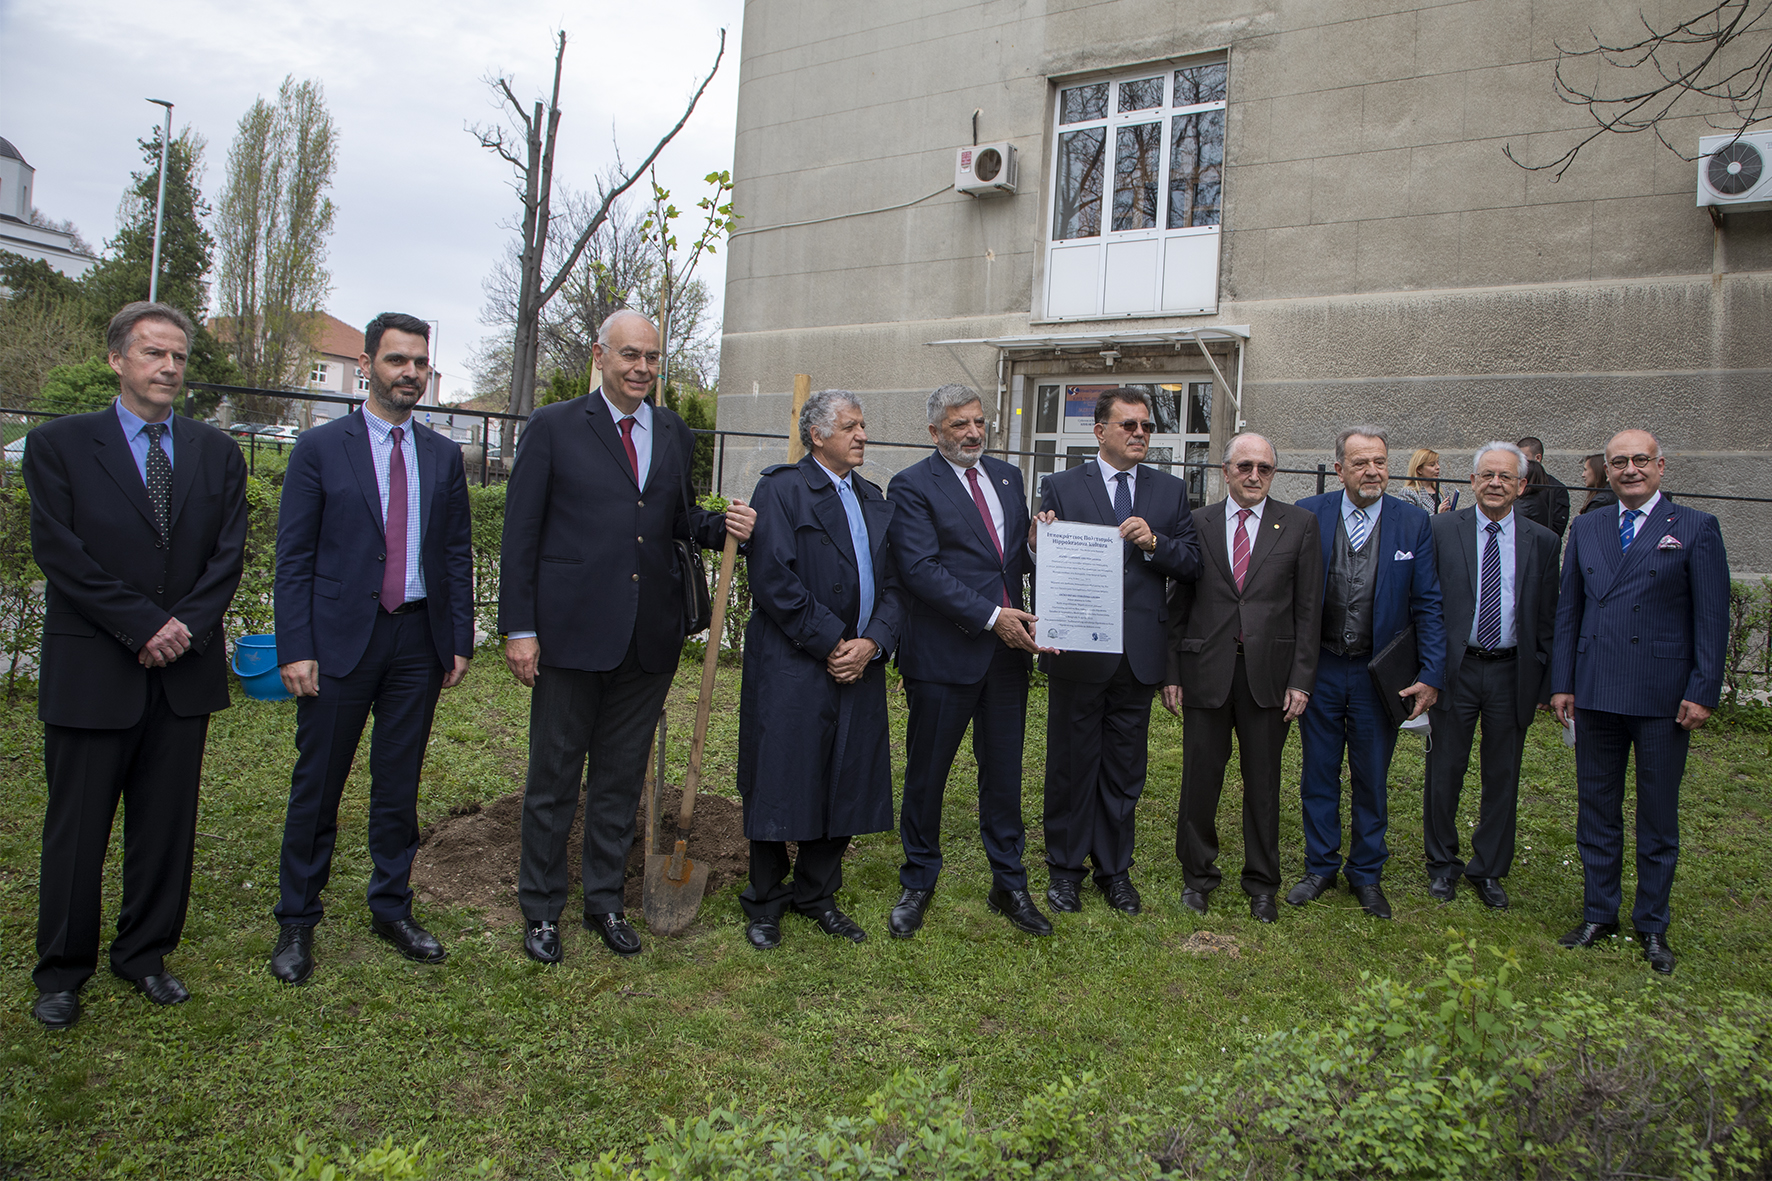 Planting of the seedling of tree of Hippocrates, Faculty of Medicine University of Belgrade